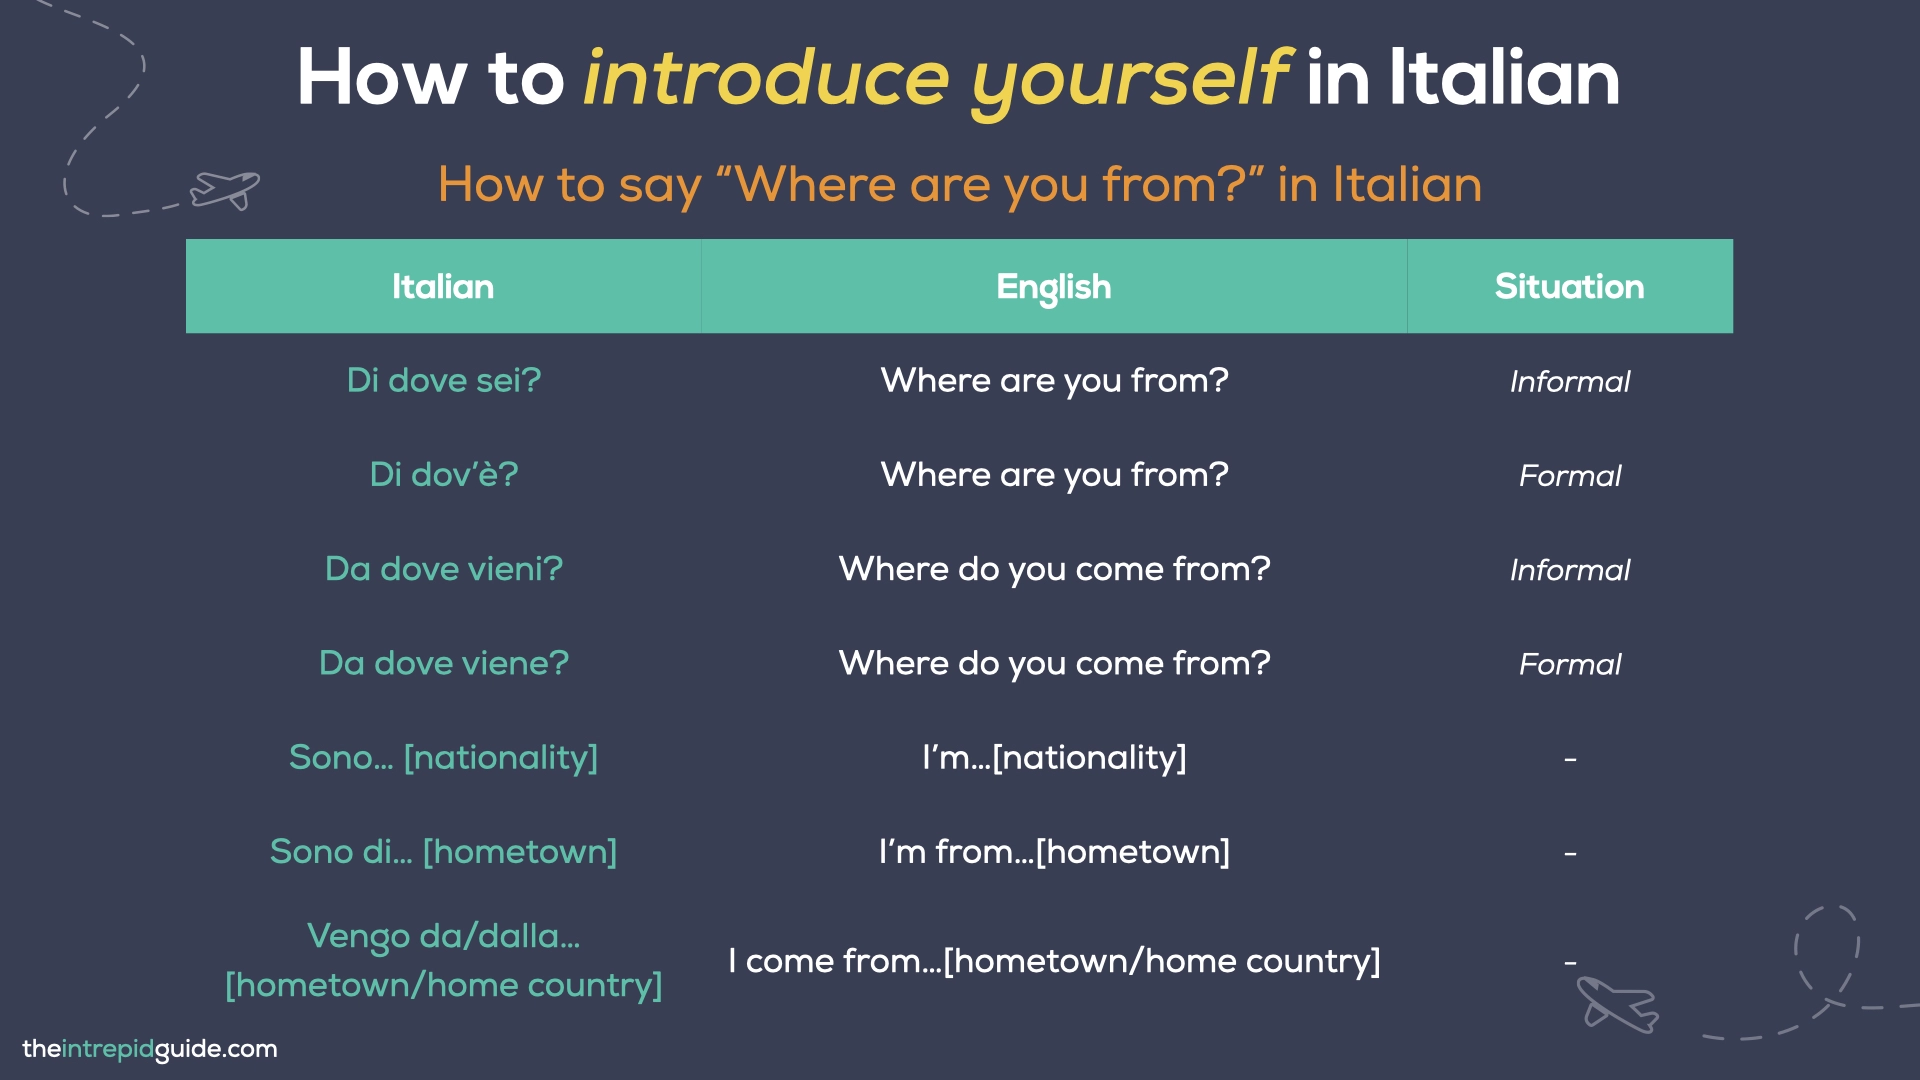 How to introduce yourself in Italian - How to say Where are you from in Italian